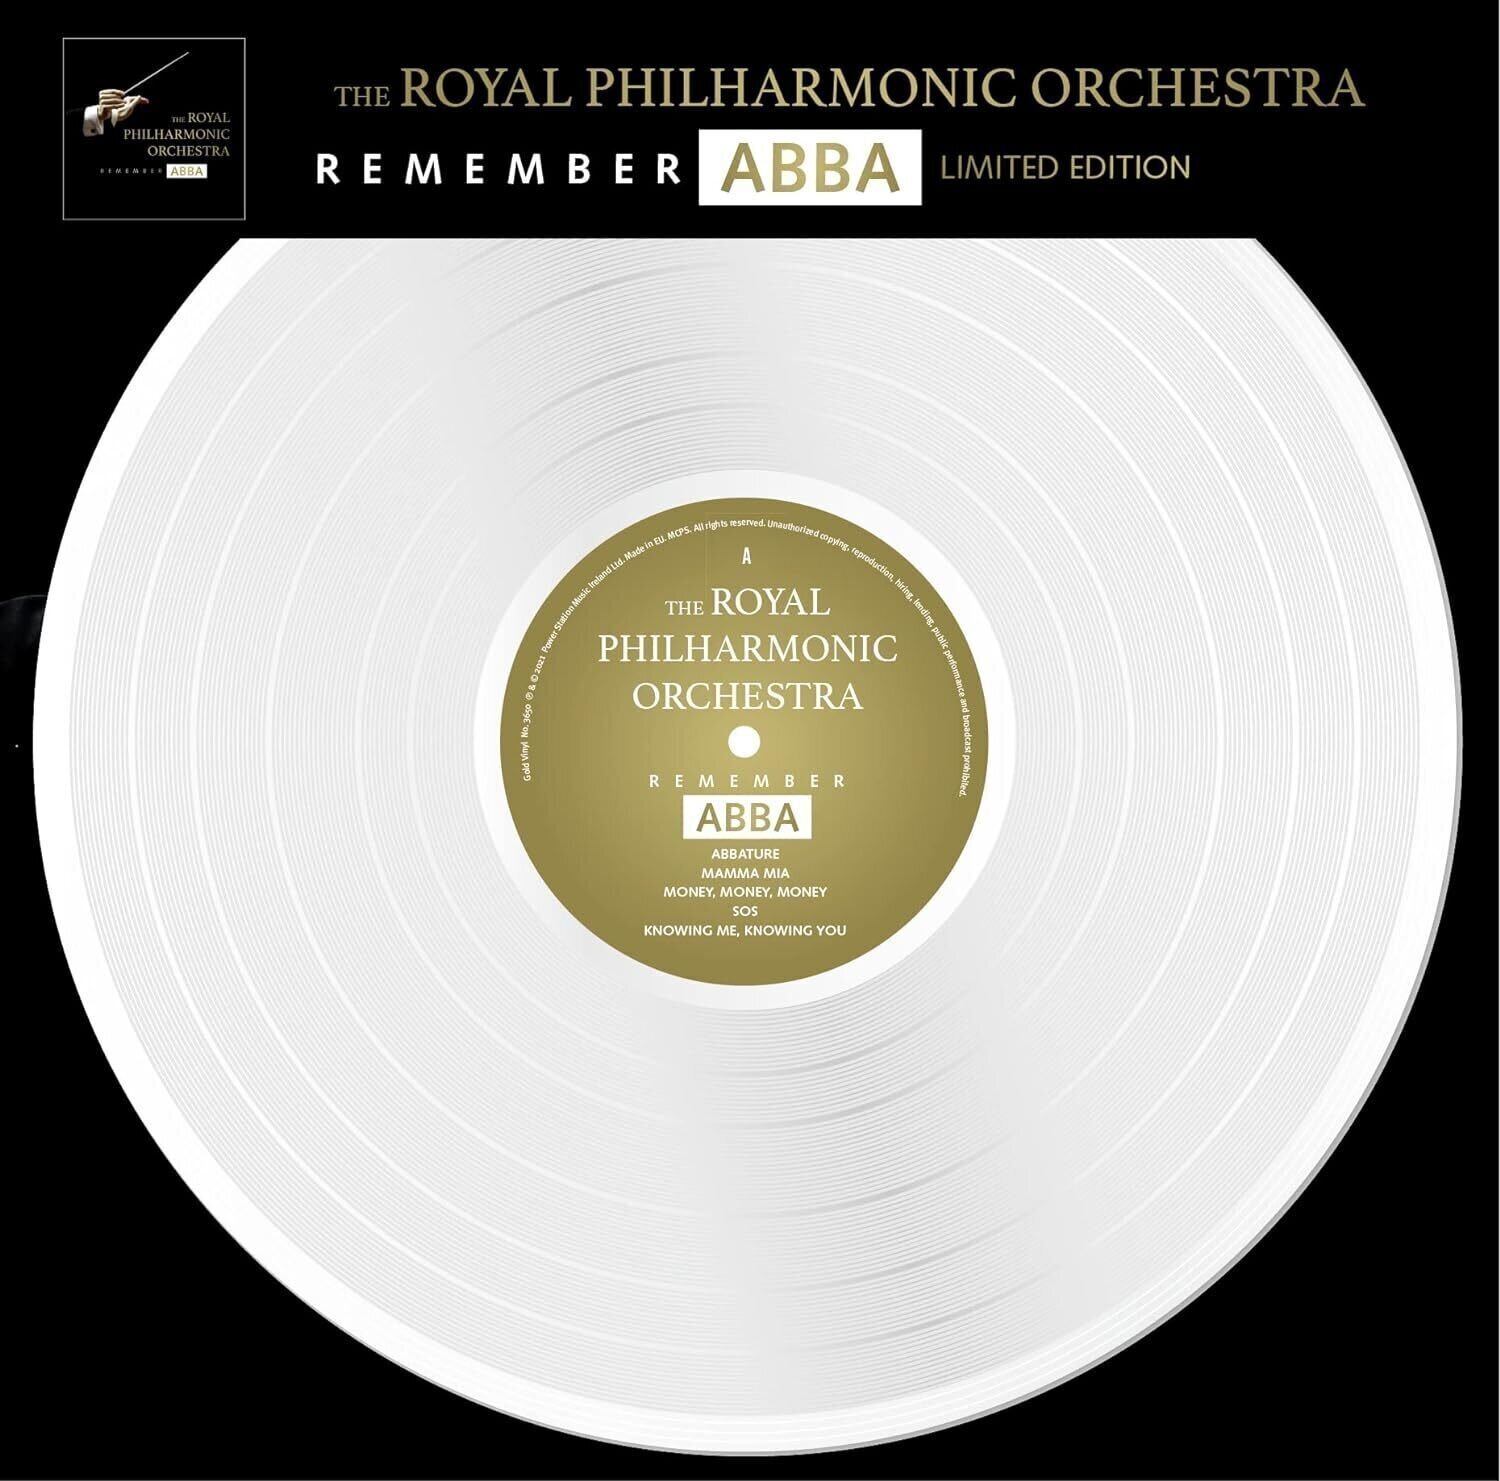 Vinylplade Royal Philharmonic Orchestra - Remember ABBA (Limited Edition) (Numbered) (Reissue) (White Coloured) (LP)